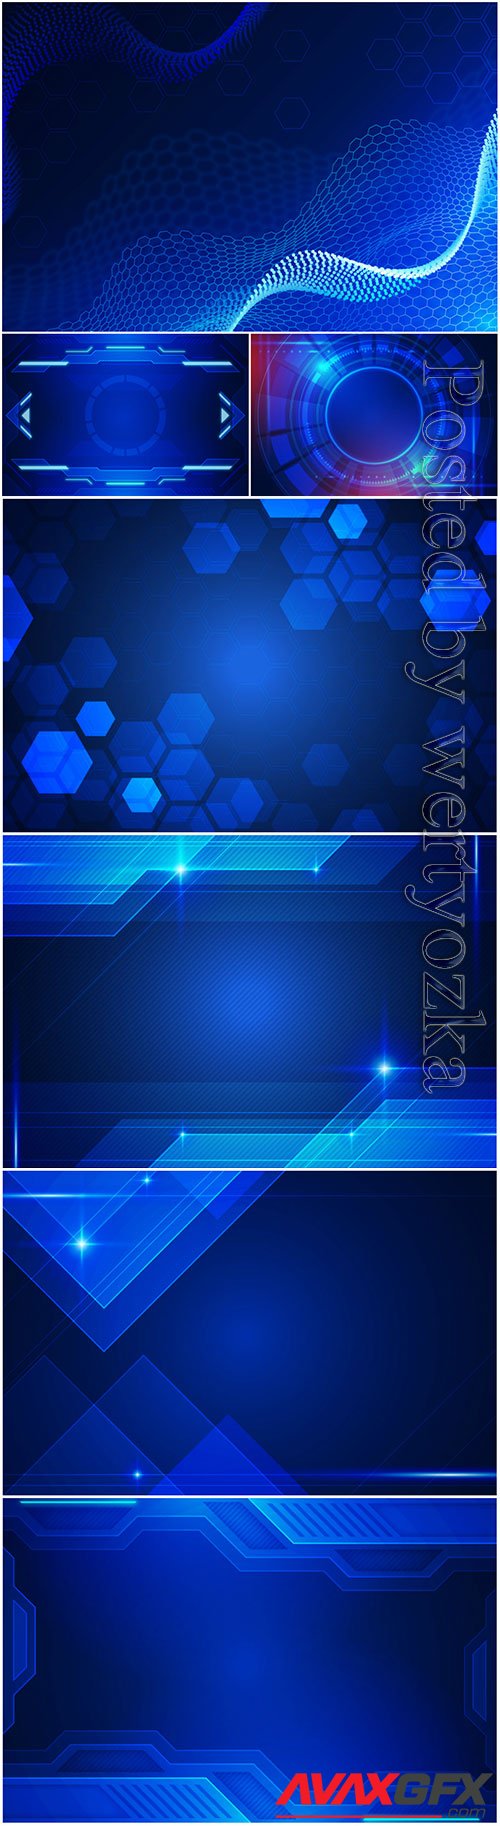 Modernistic tech vector background